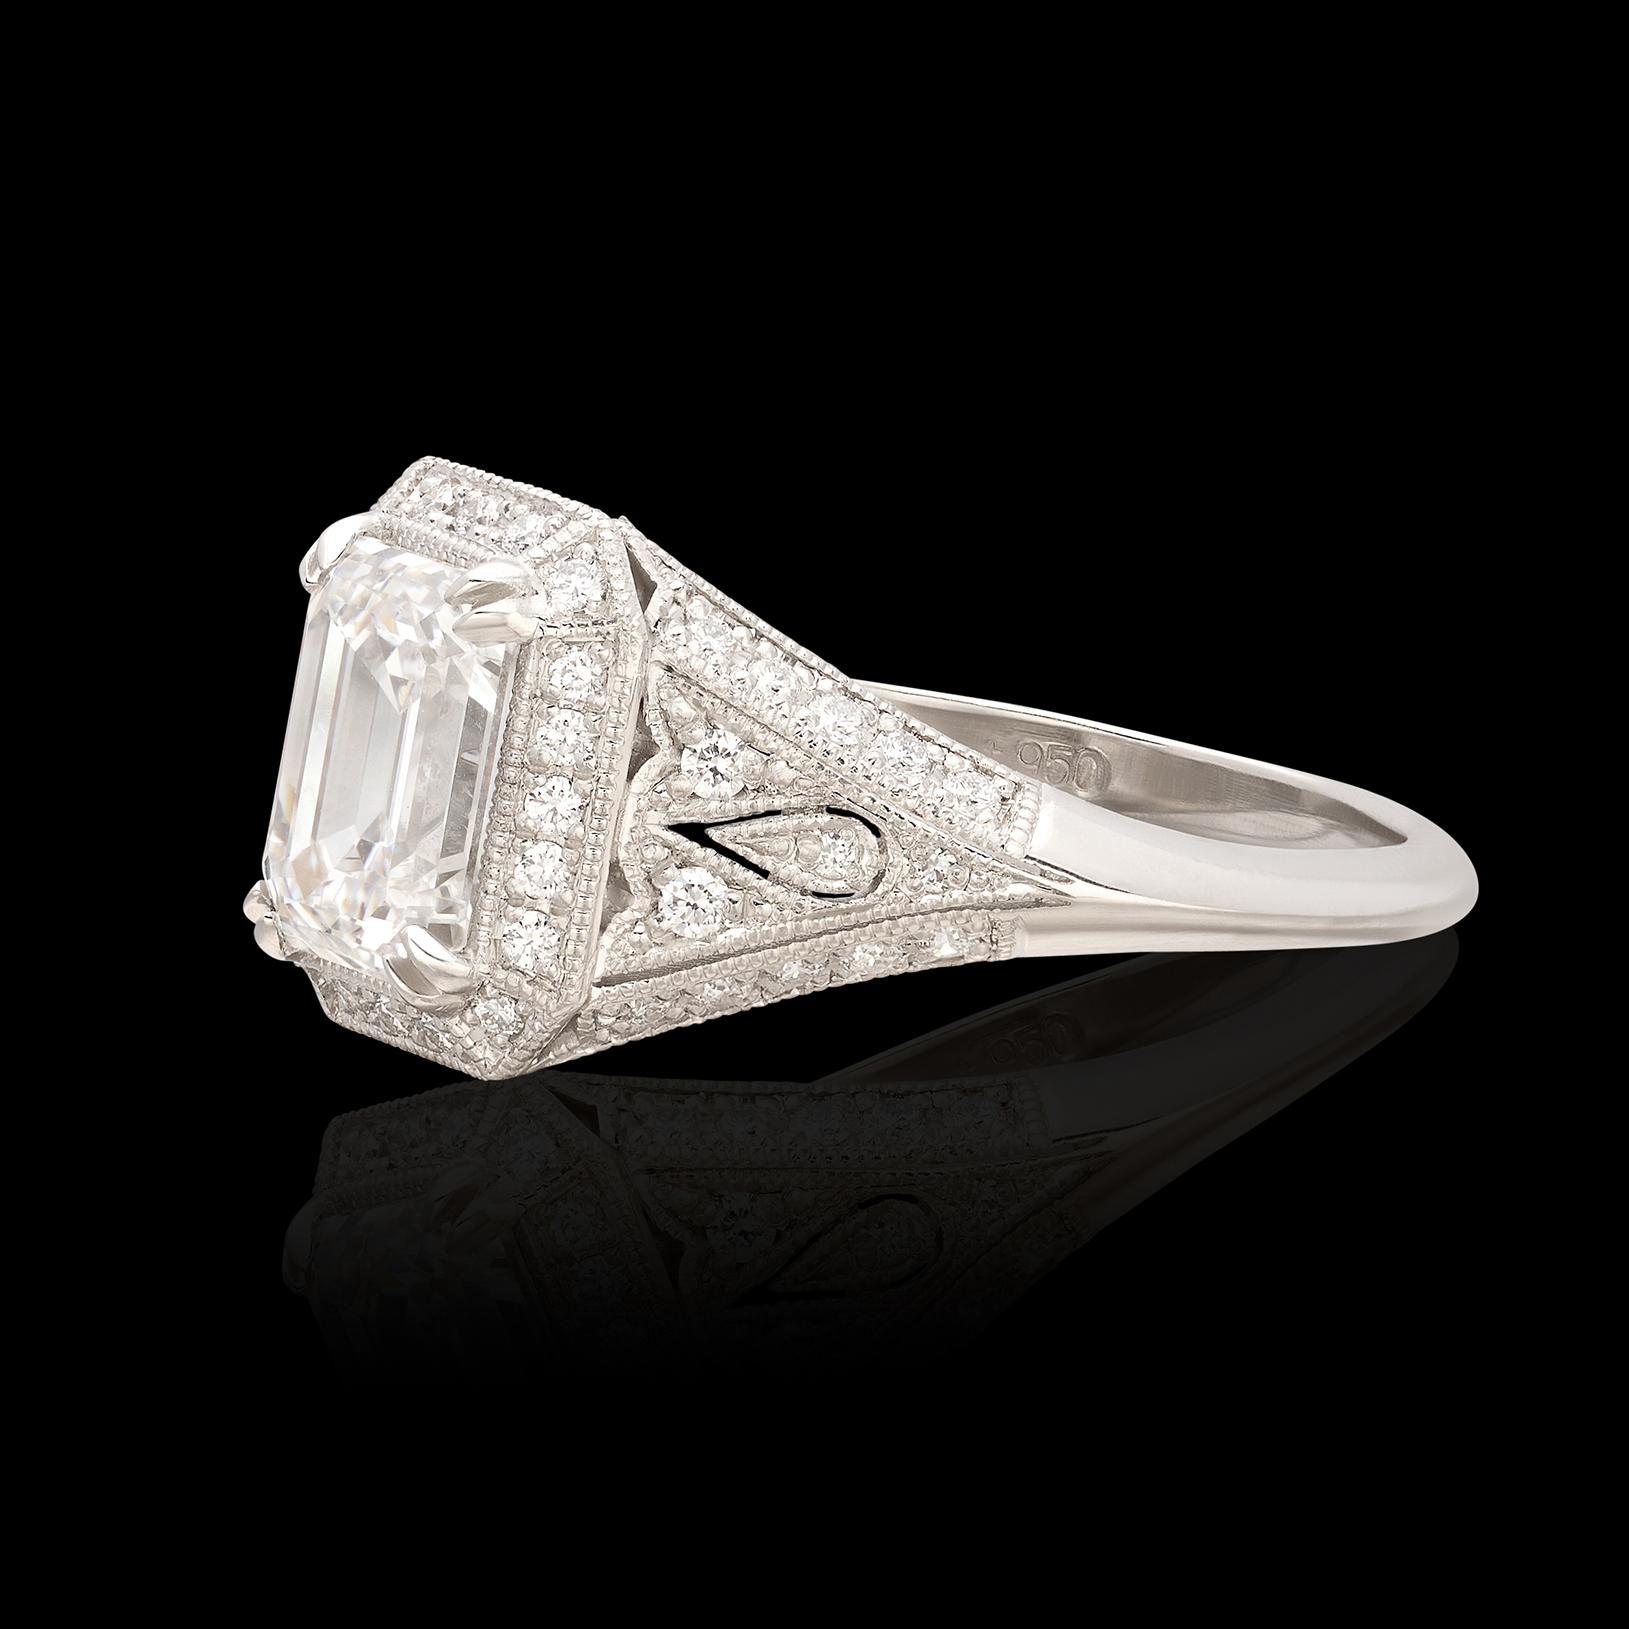 Extraordinary 2.01ct Emerald Cut Art Deco Style Platinum Diamond Ring In New Condition For Sale In San Francisco, CA